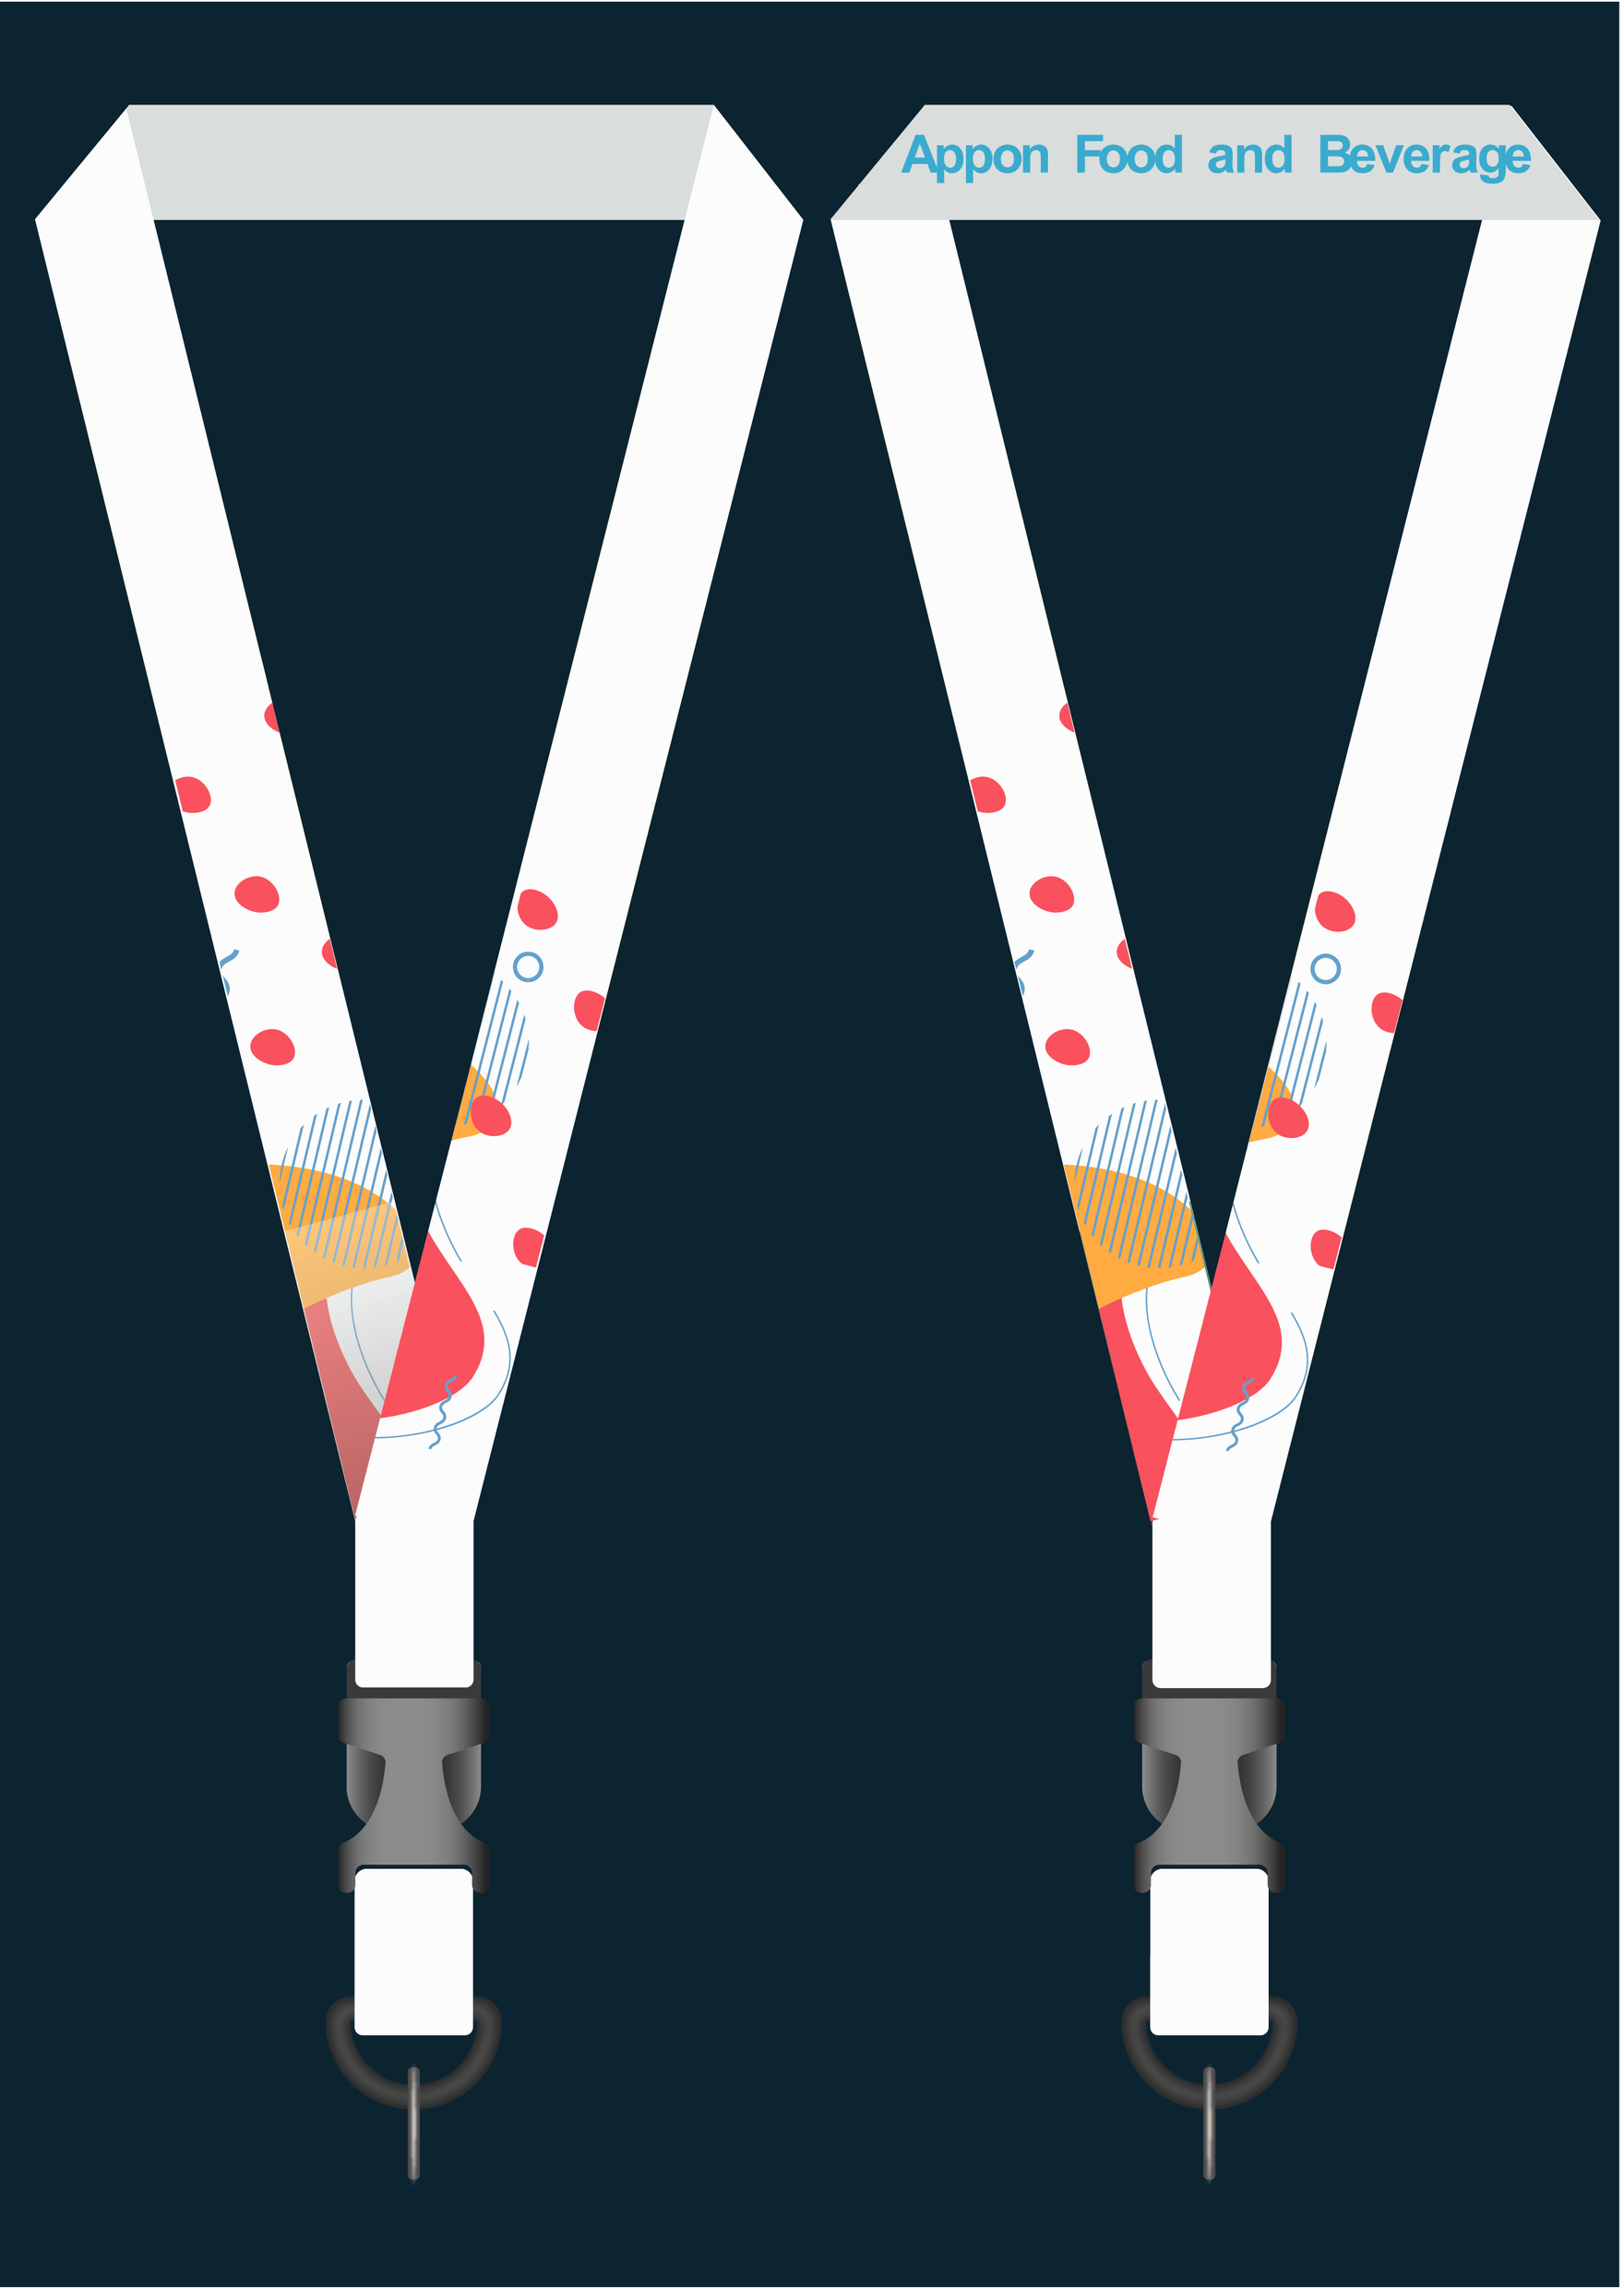 Roblox Lanyard Template - Download in Illustrator, PSD, EPS, SVG, JPG, PNG